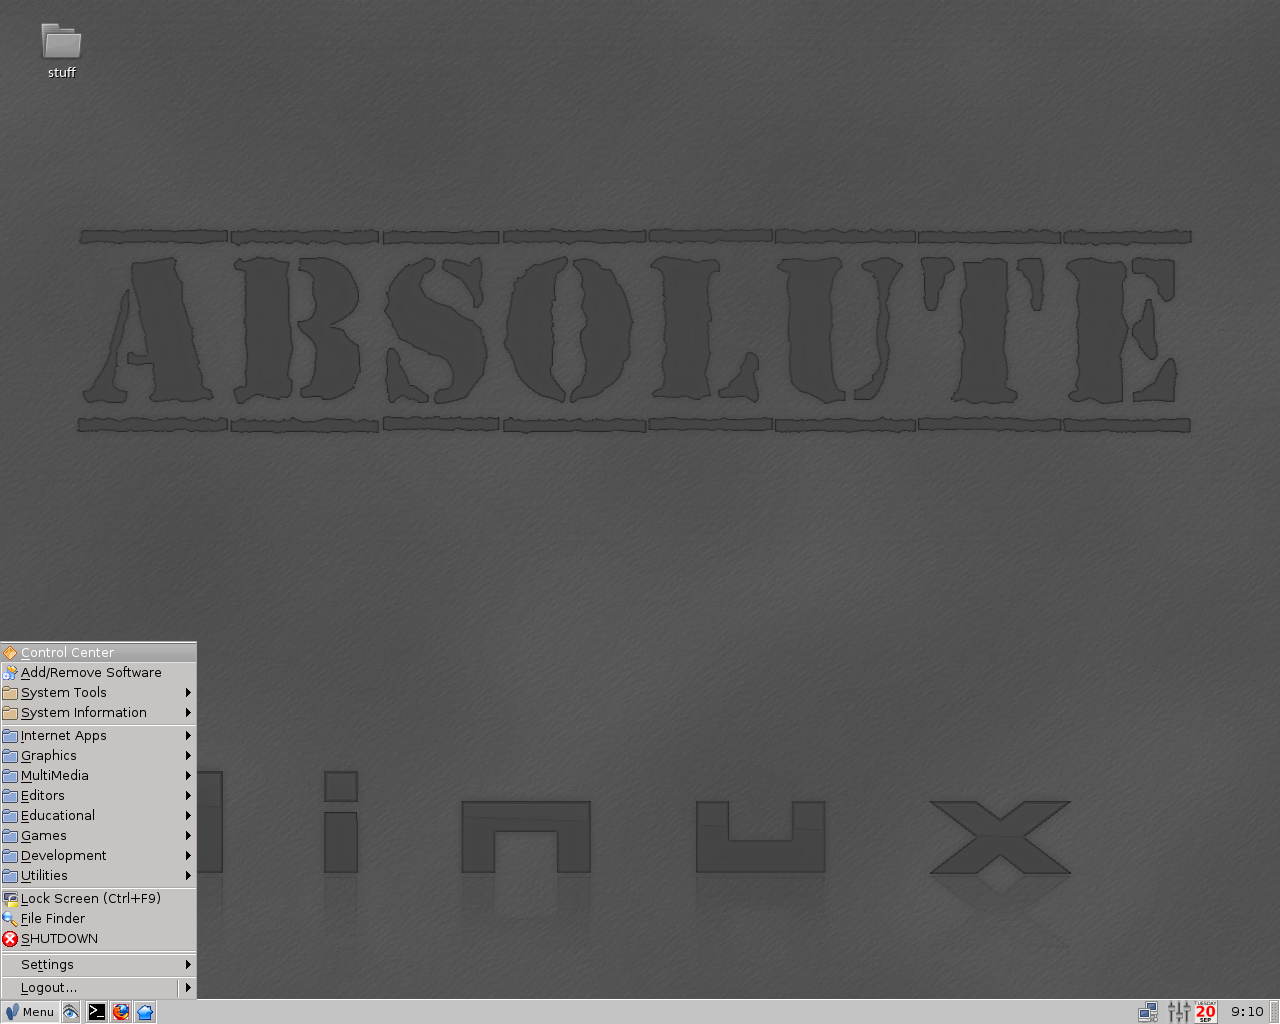 Absolute Linux 2020.11.03